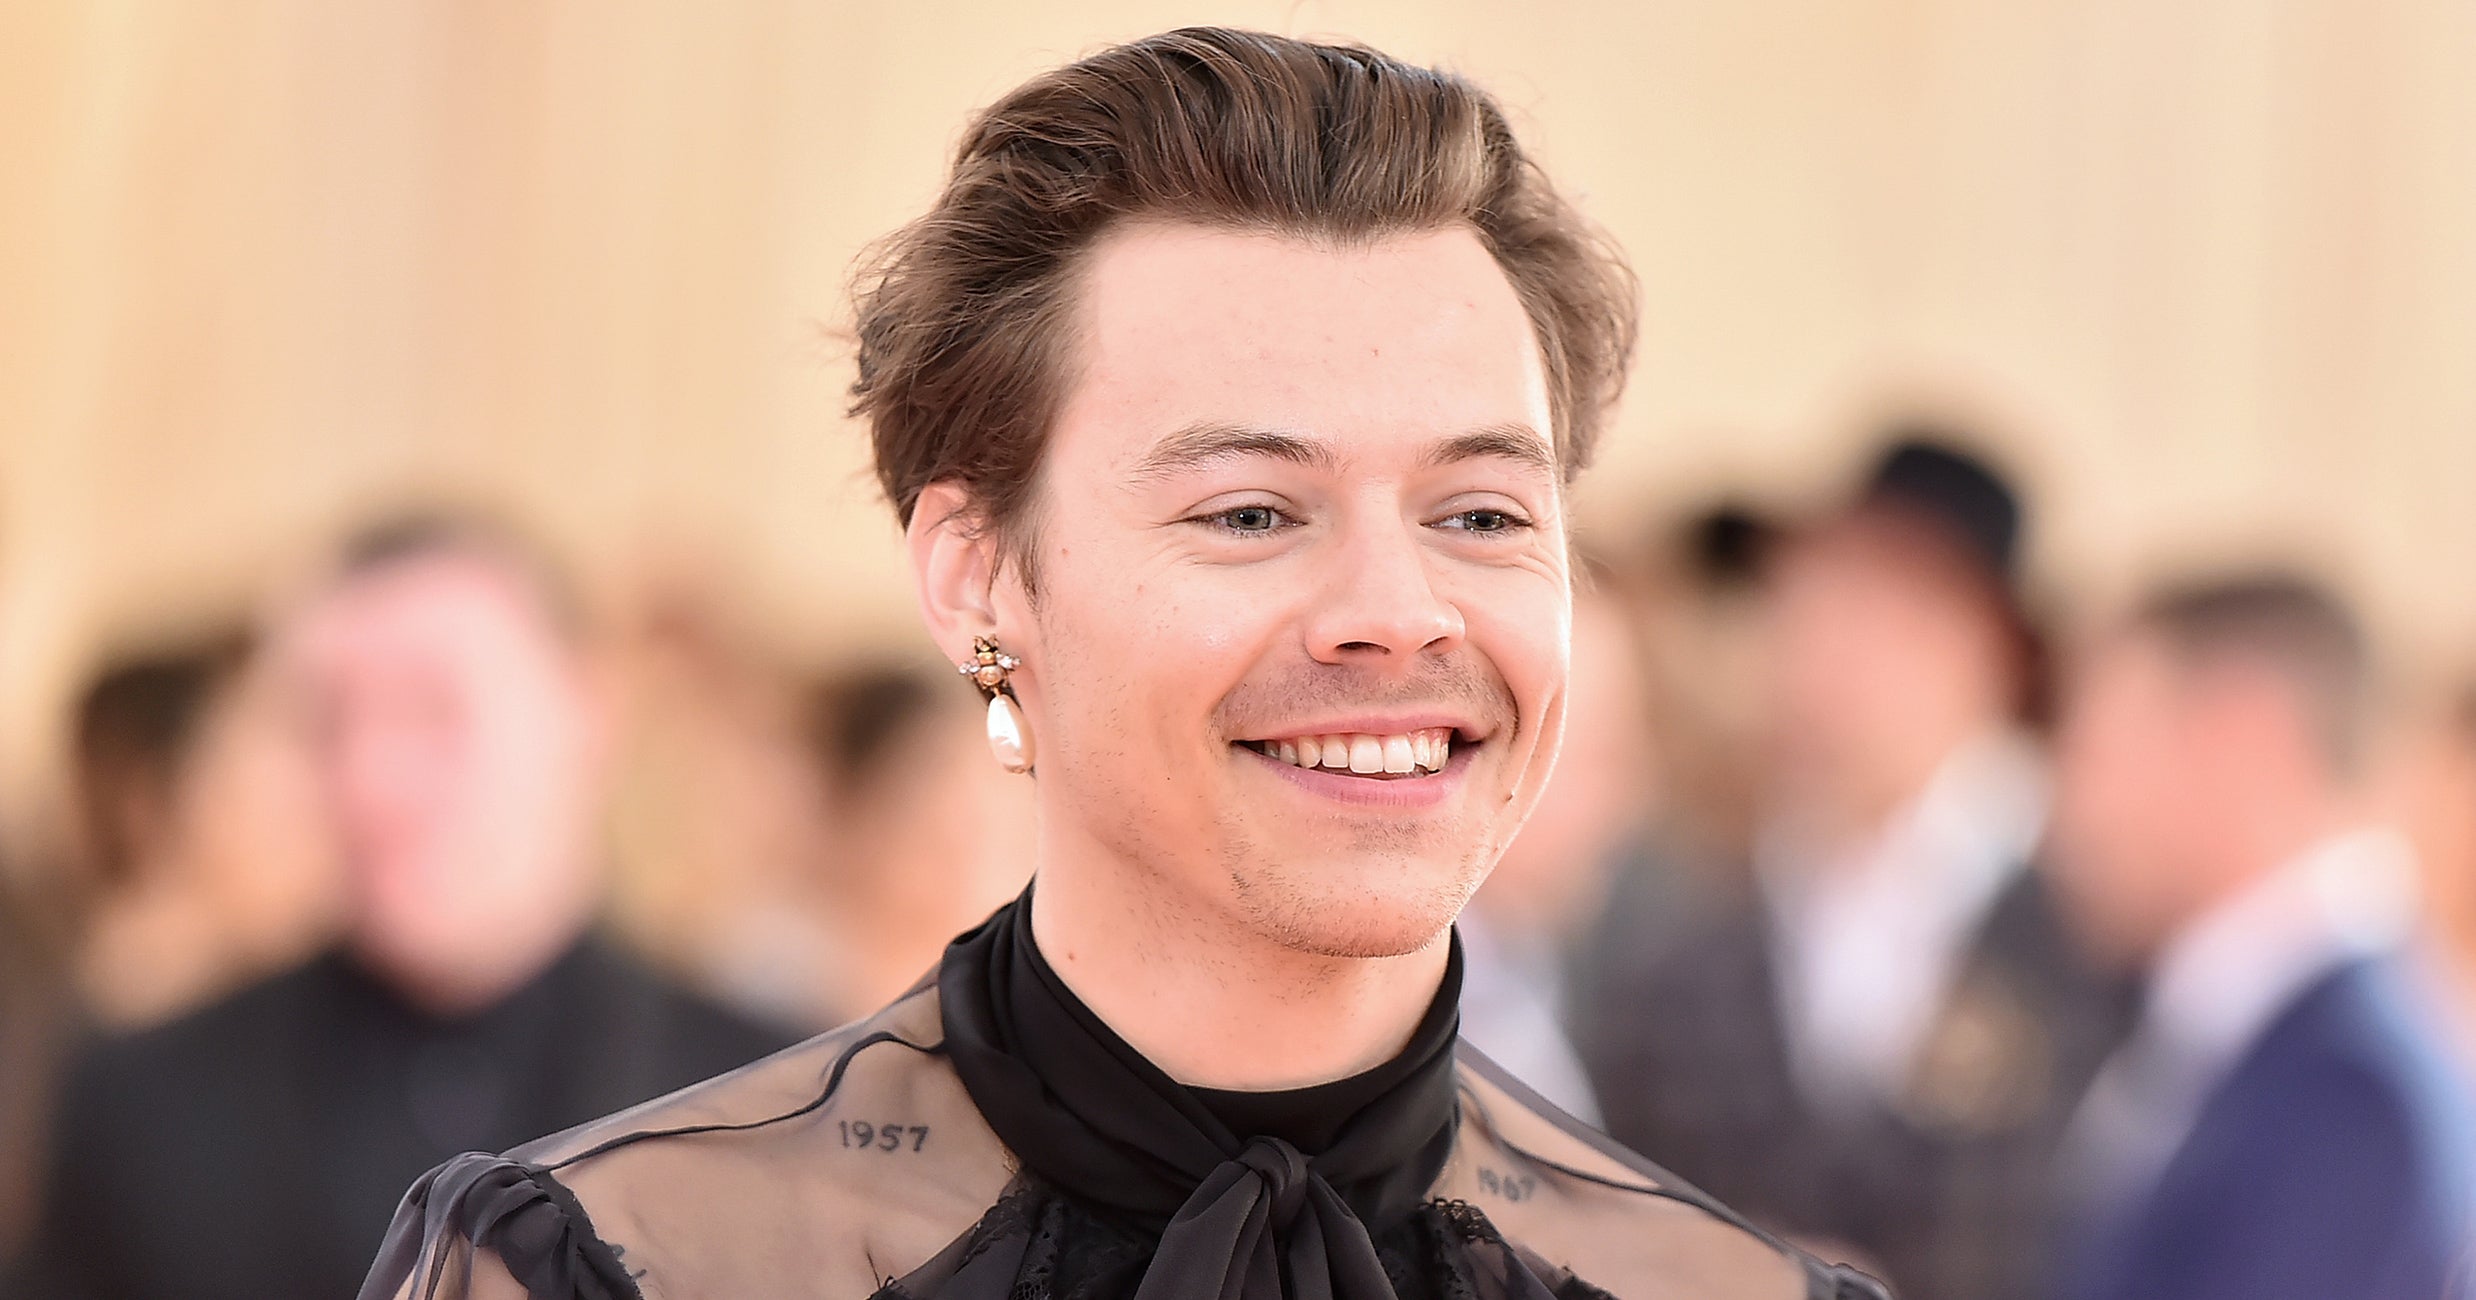 Fox News Anchor Came For Harry Styles' Fashion